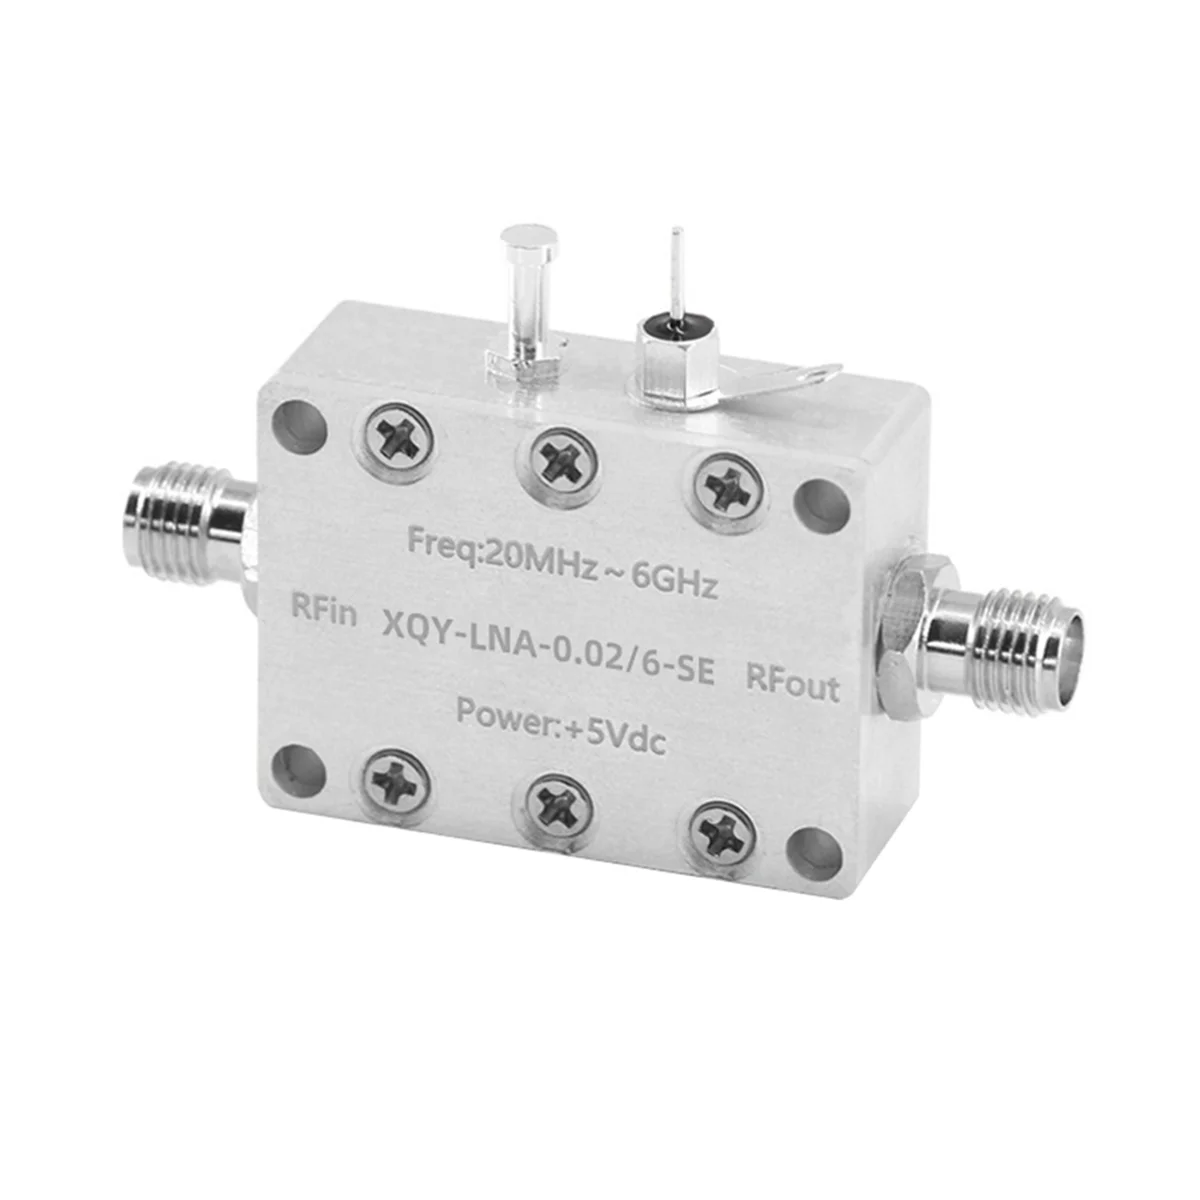 002-6ghz-lna-low-noise-amplifier-high-linear-and-high-gain-rf-preamplifier-with-sma-female-connector